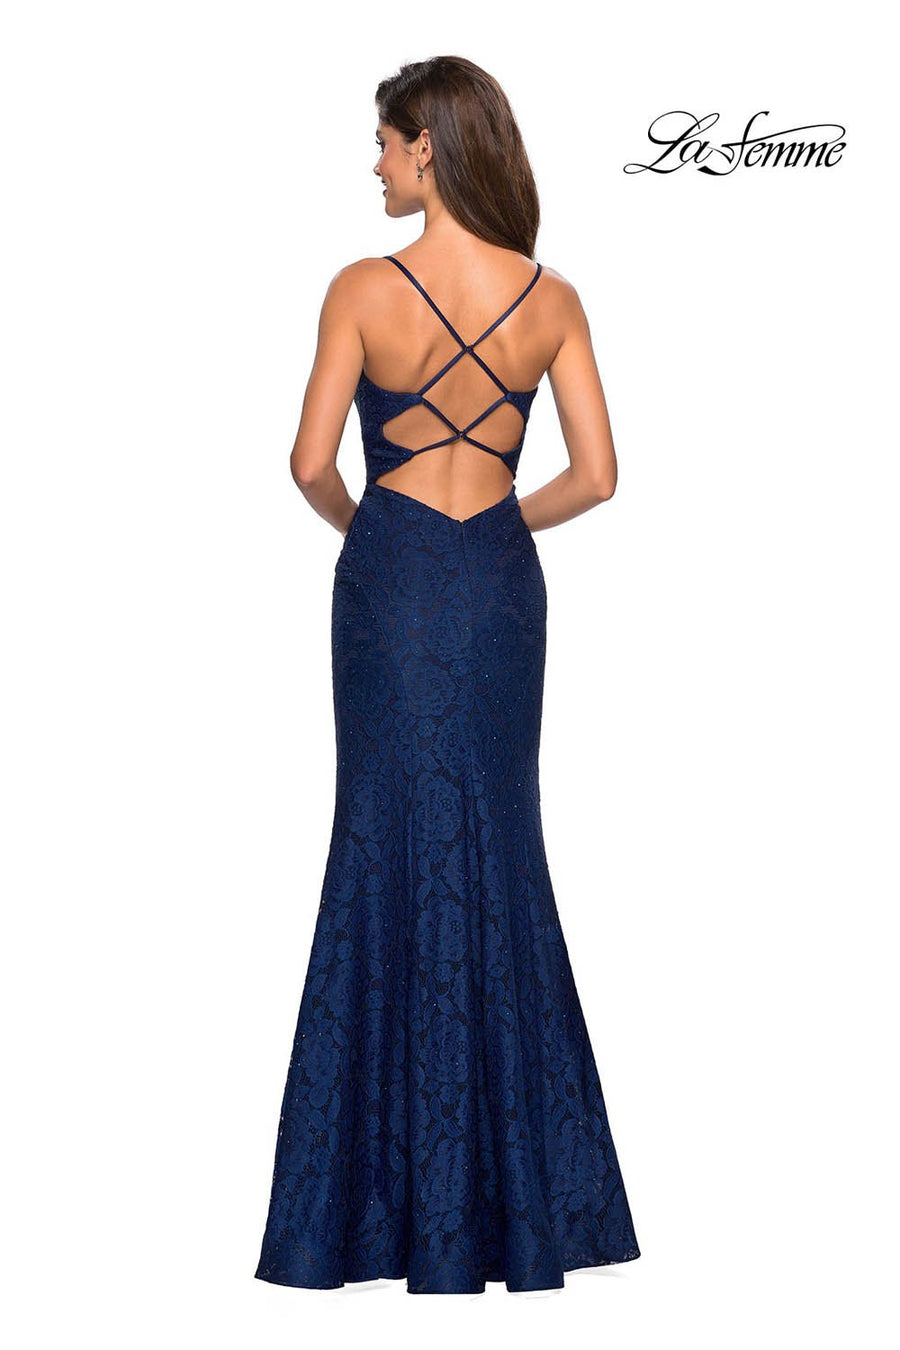 La Femme 27565 prom dress images.  La Femme 27565 is available in these colors: Gunmetal, Hot Pink, Navy, Periwinkle, White, Yellow.